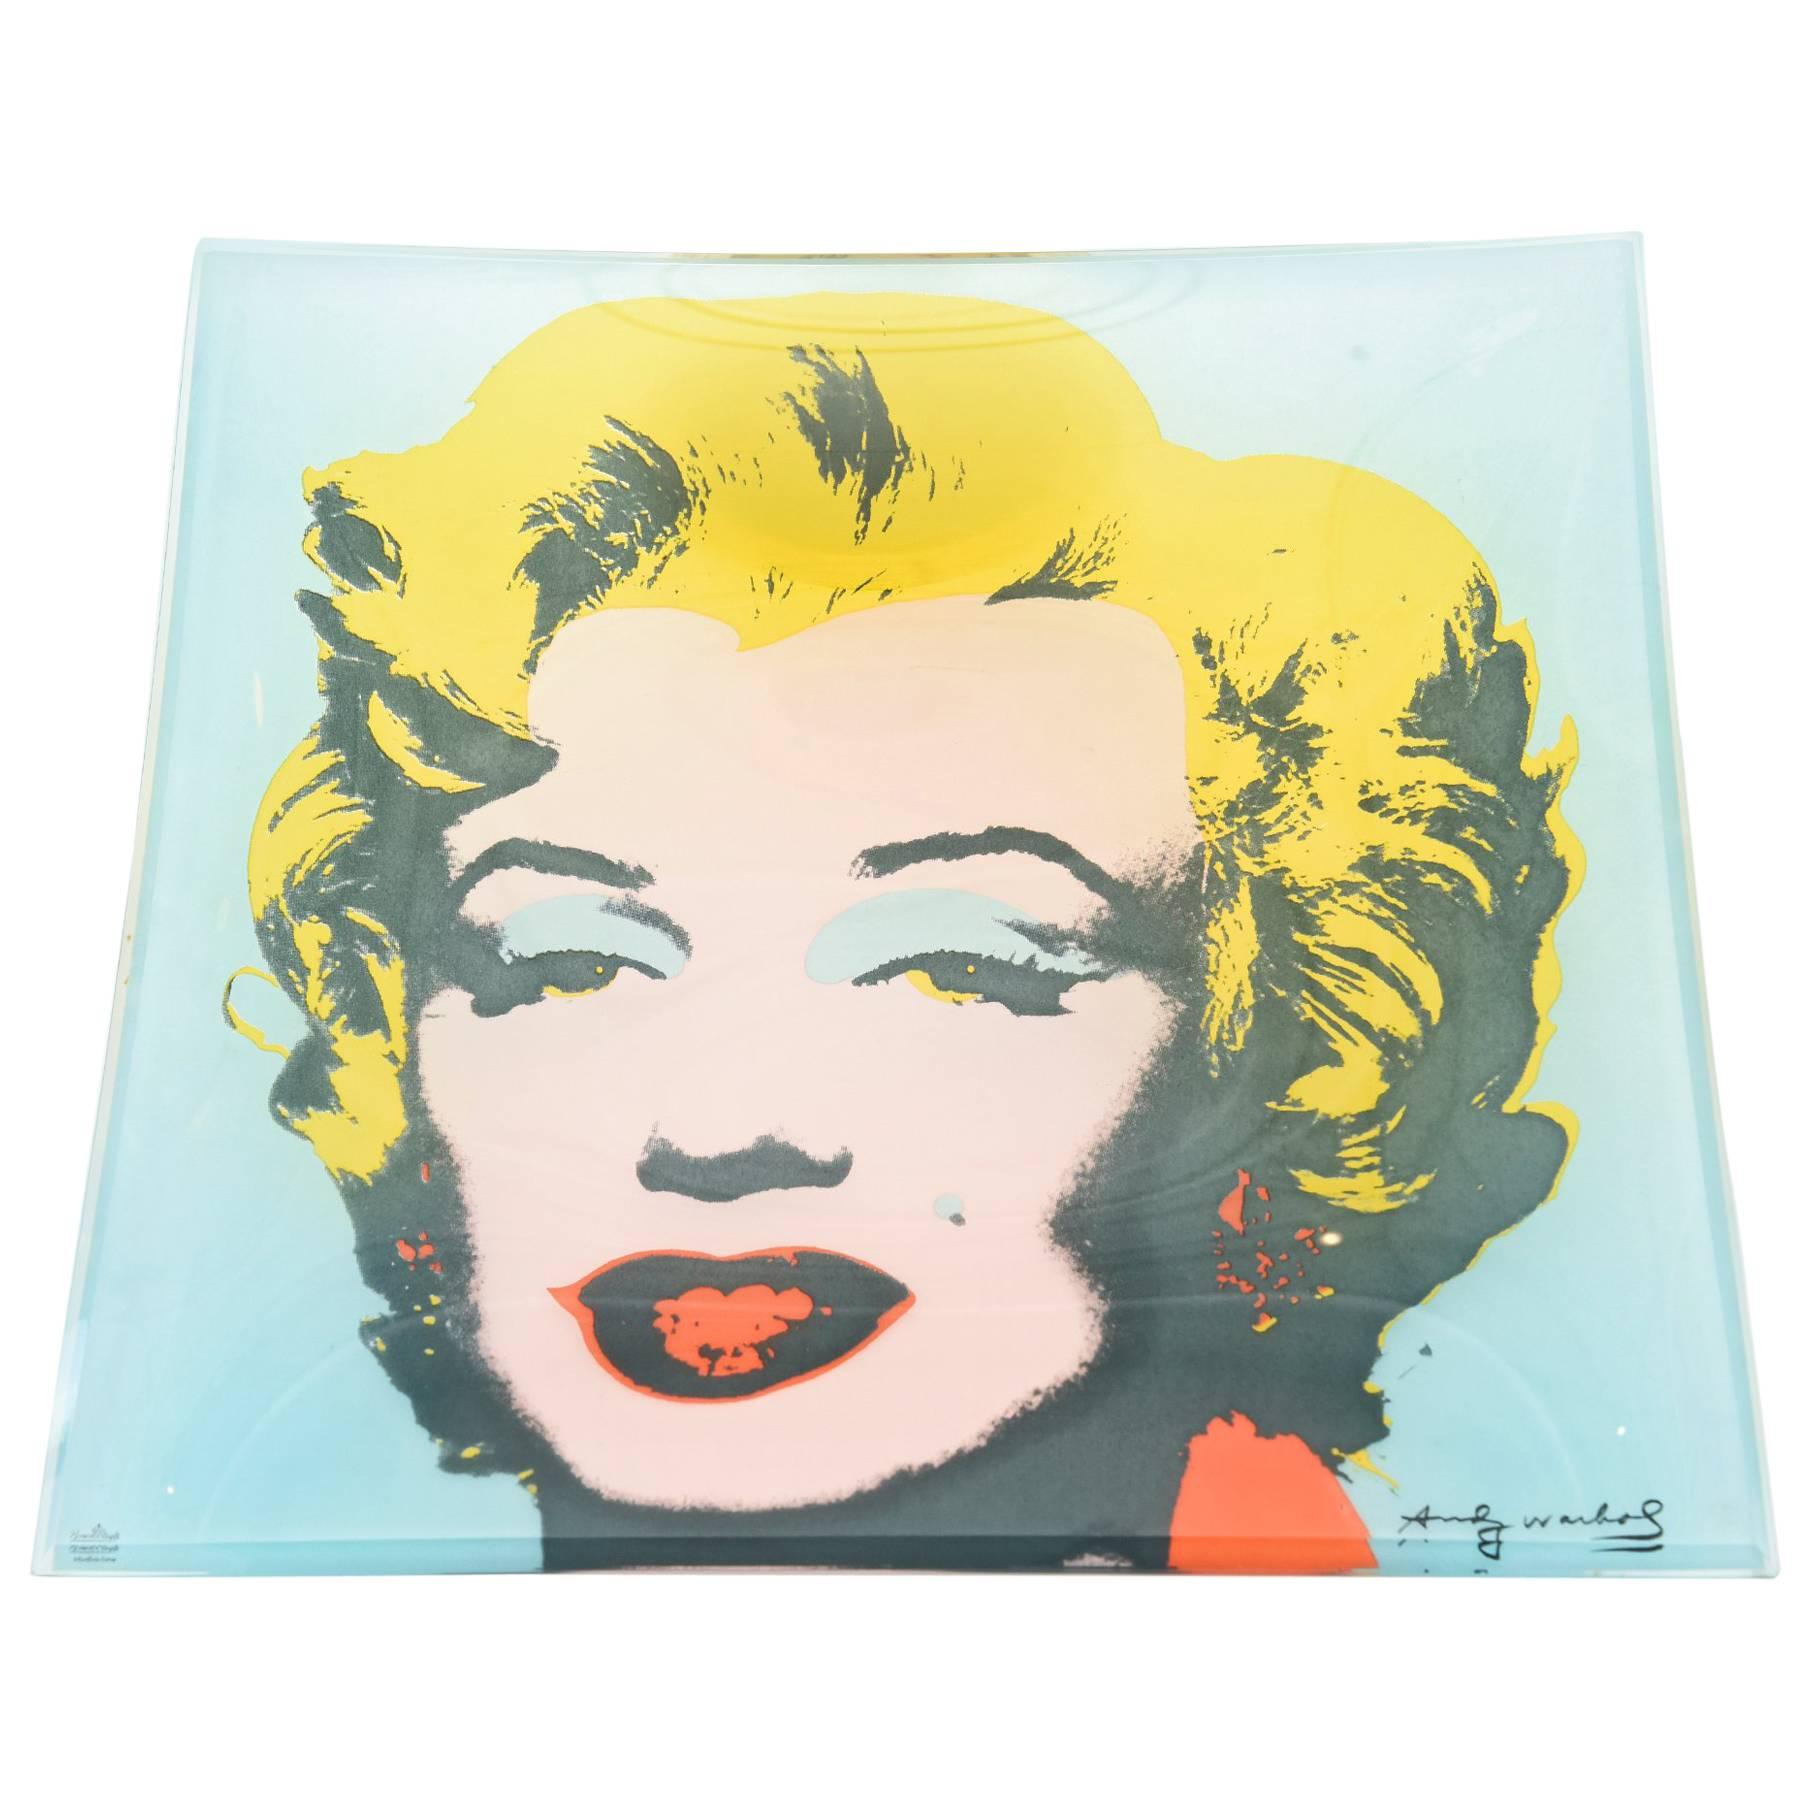 Andy Warhol "Marilyn Monroe" Glass Square Dish/ Plate or Tray